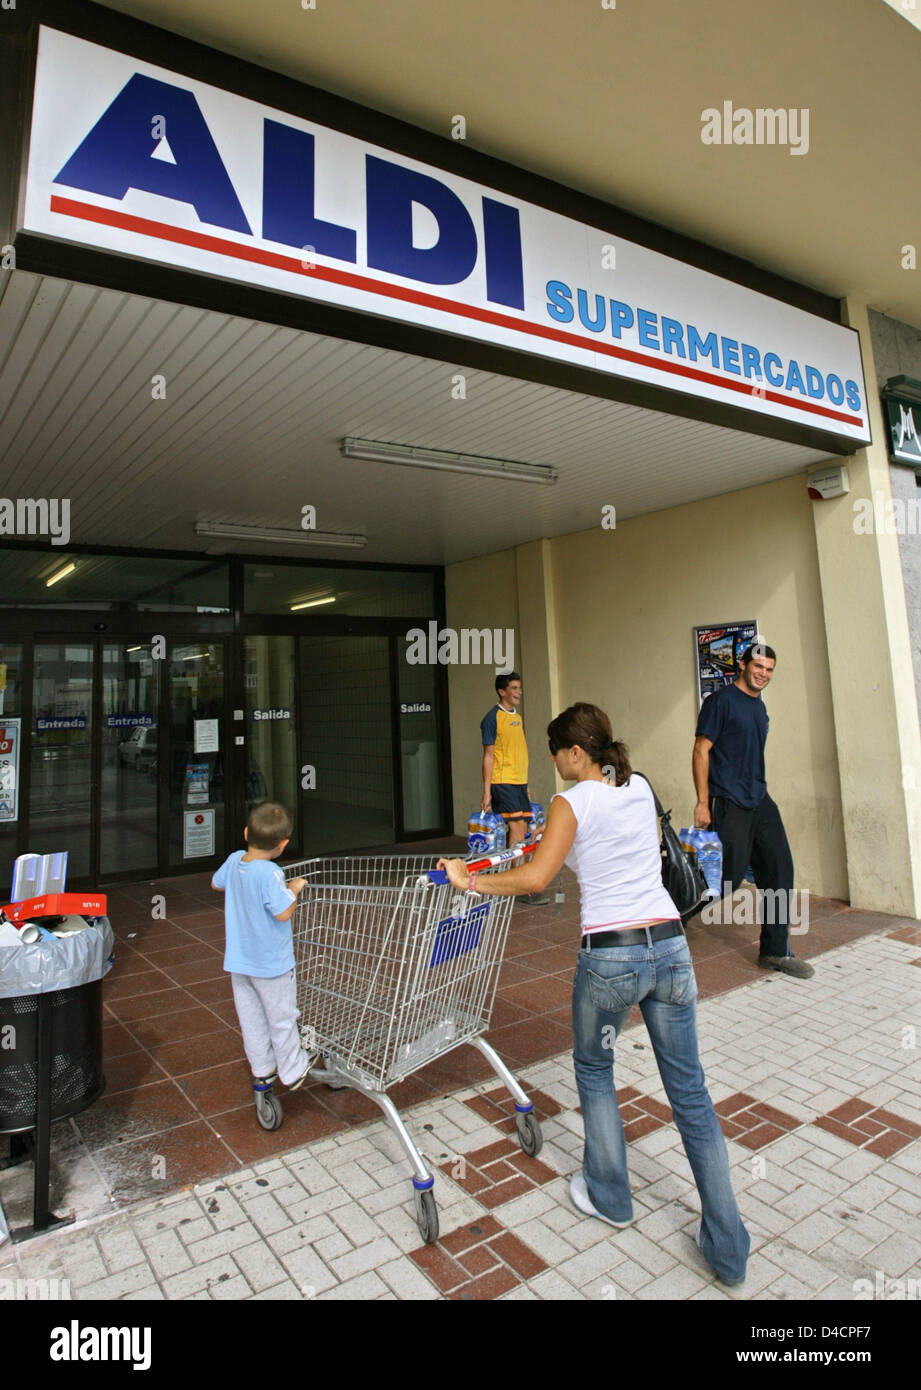 A store of the German supermarket chain Aldi is pictured in the resort town  of Torrox in southern Spain, 20 October 2007. Photo: Bodo Marks Stock Photo  - Alamy